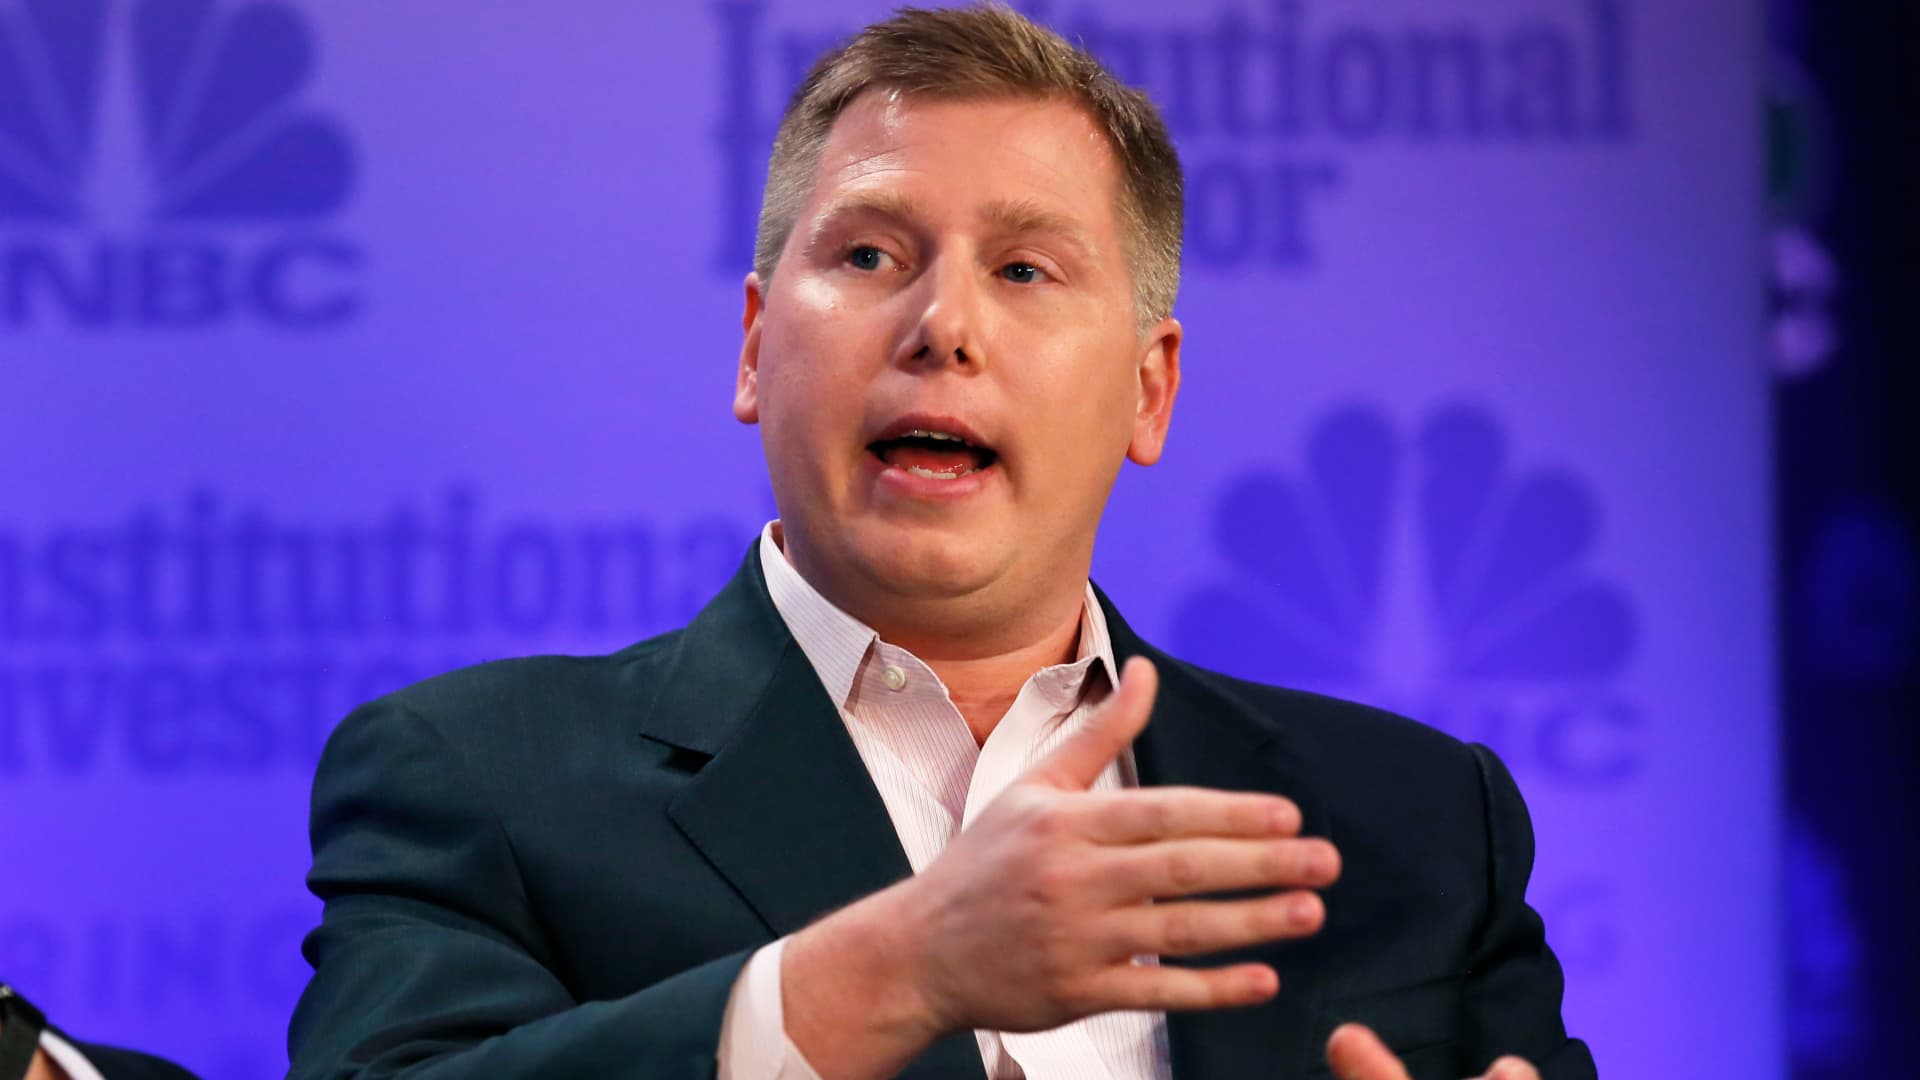 DCG's Barry Silbert reveals crypto firm has  billion in debt as he tries to calm investors after FTX 